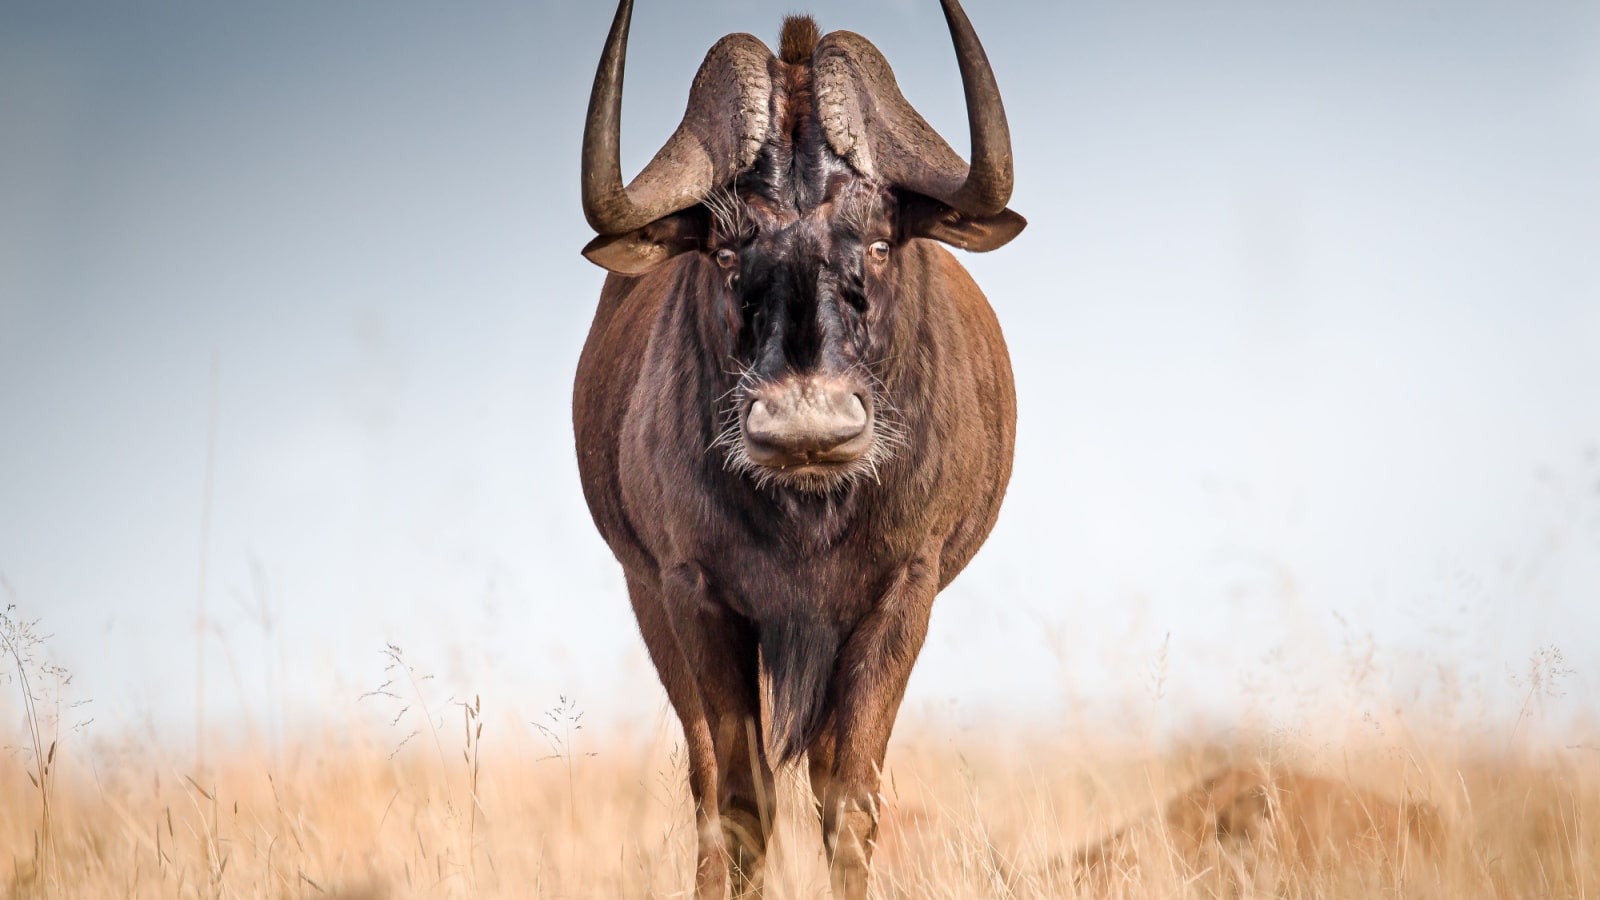 <p>The wildebeest, also known as gnus, are large antelopes of the goat and cattle family. They are nibbling at grass blades and green leaves in East Africa.</p>